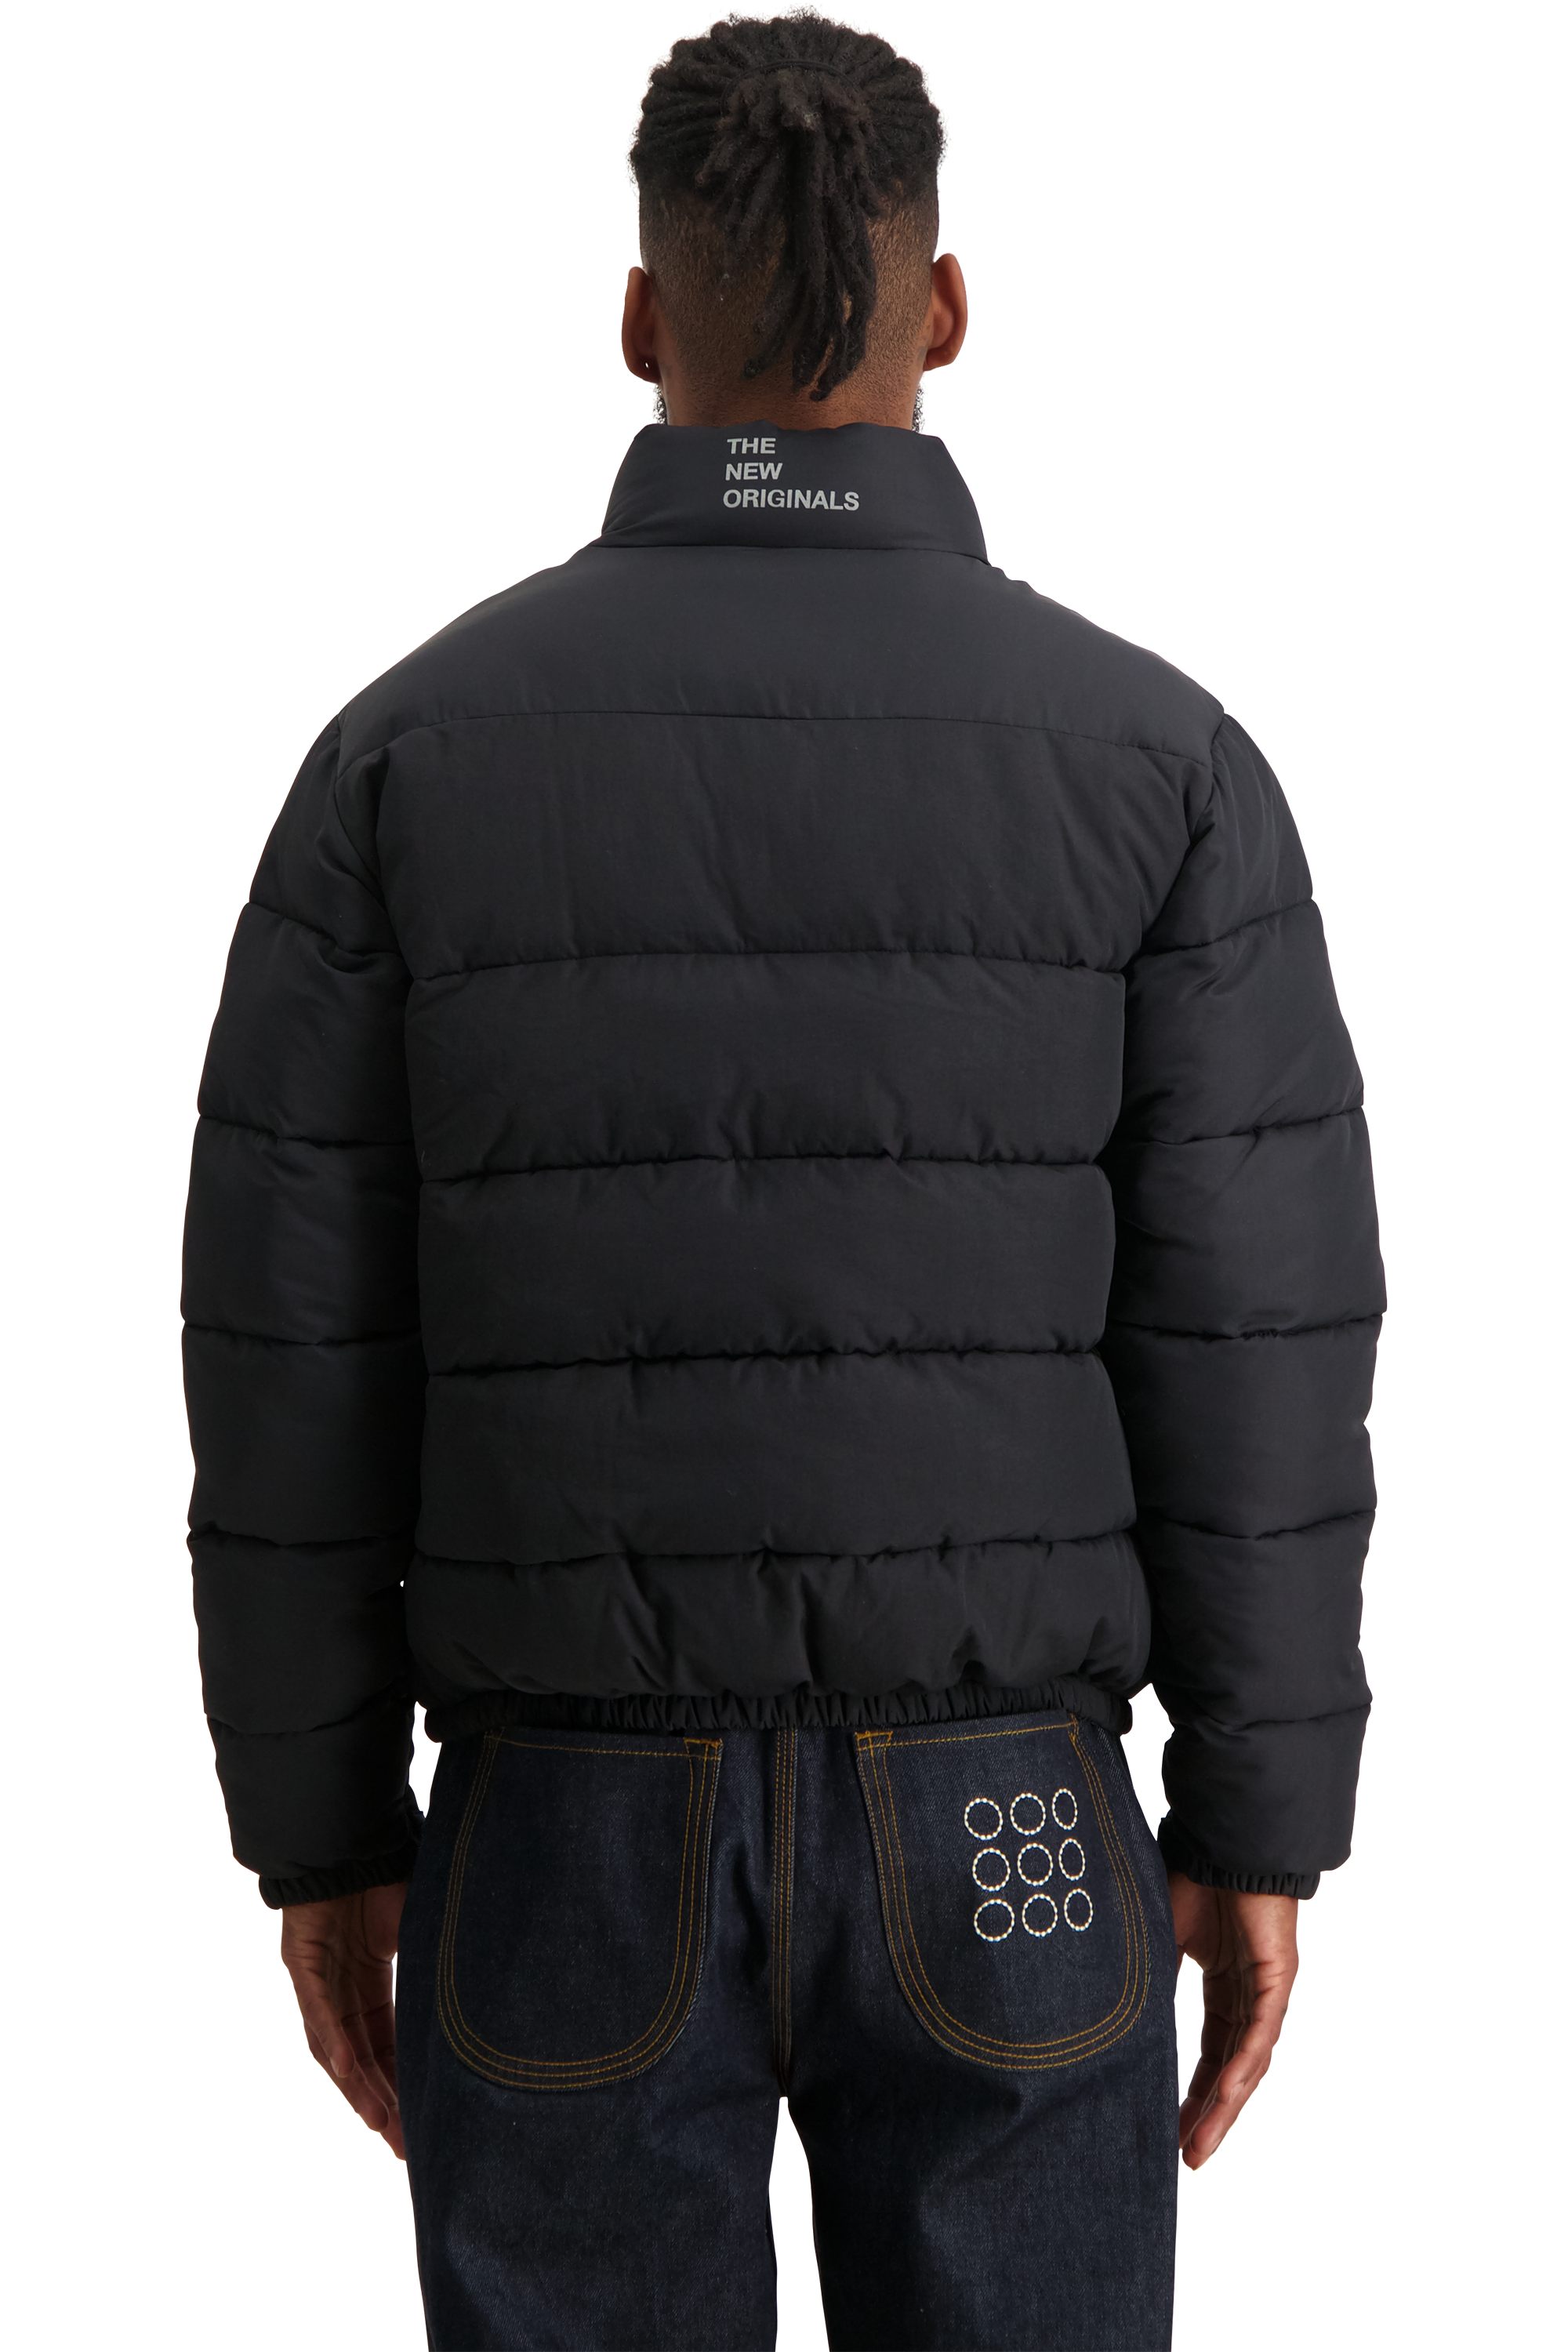 products-ninedotscloudpufferjacket_detail_tiff_2-png